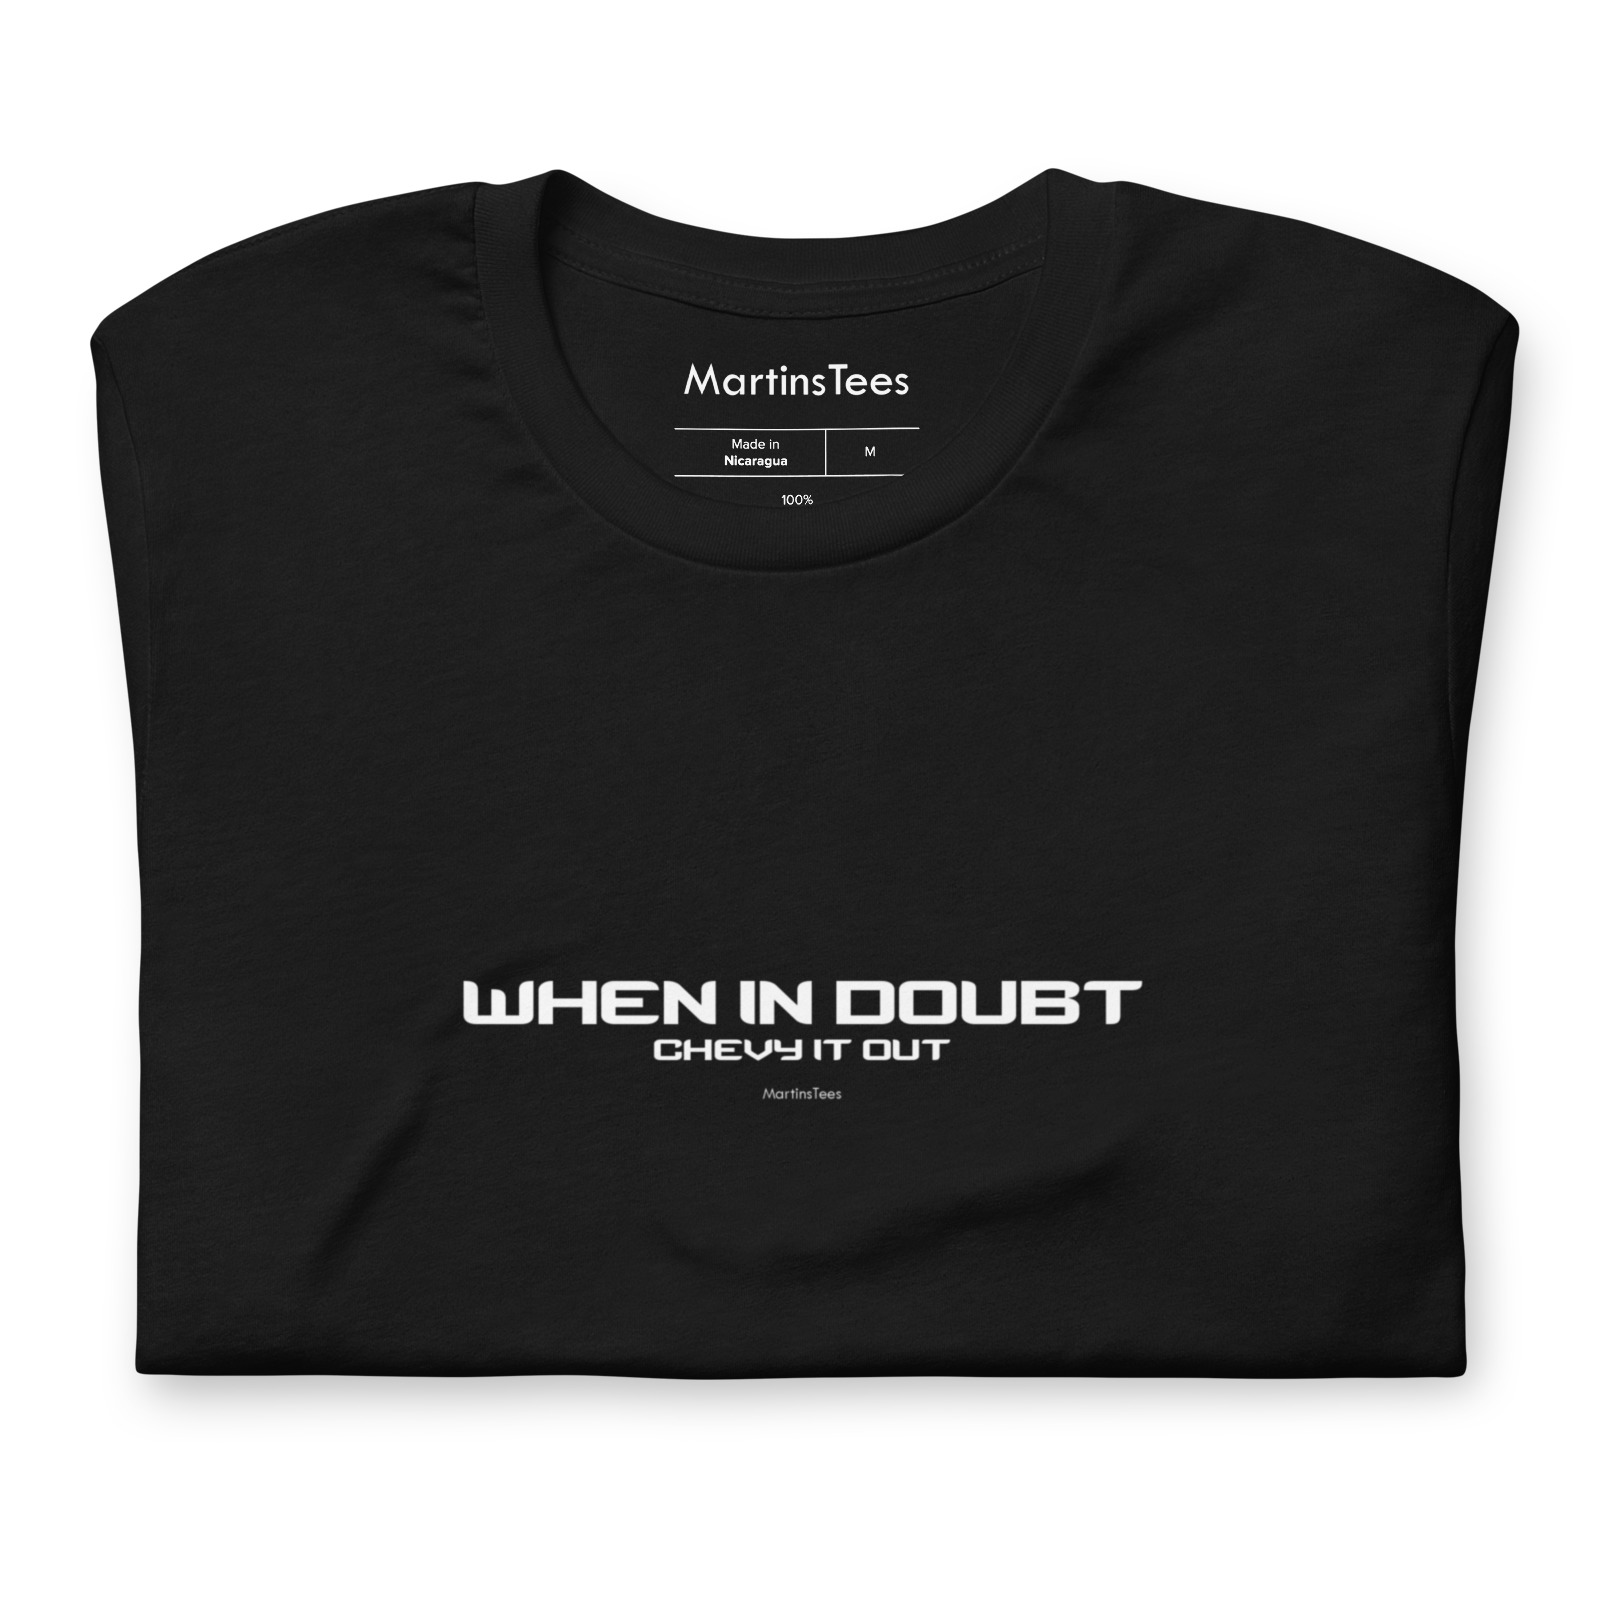 T-shirt: WHEN IN DOUBT - CHEVY IT OUT